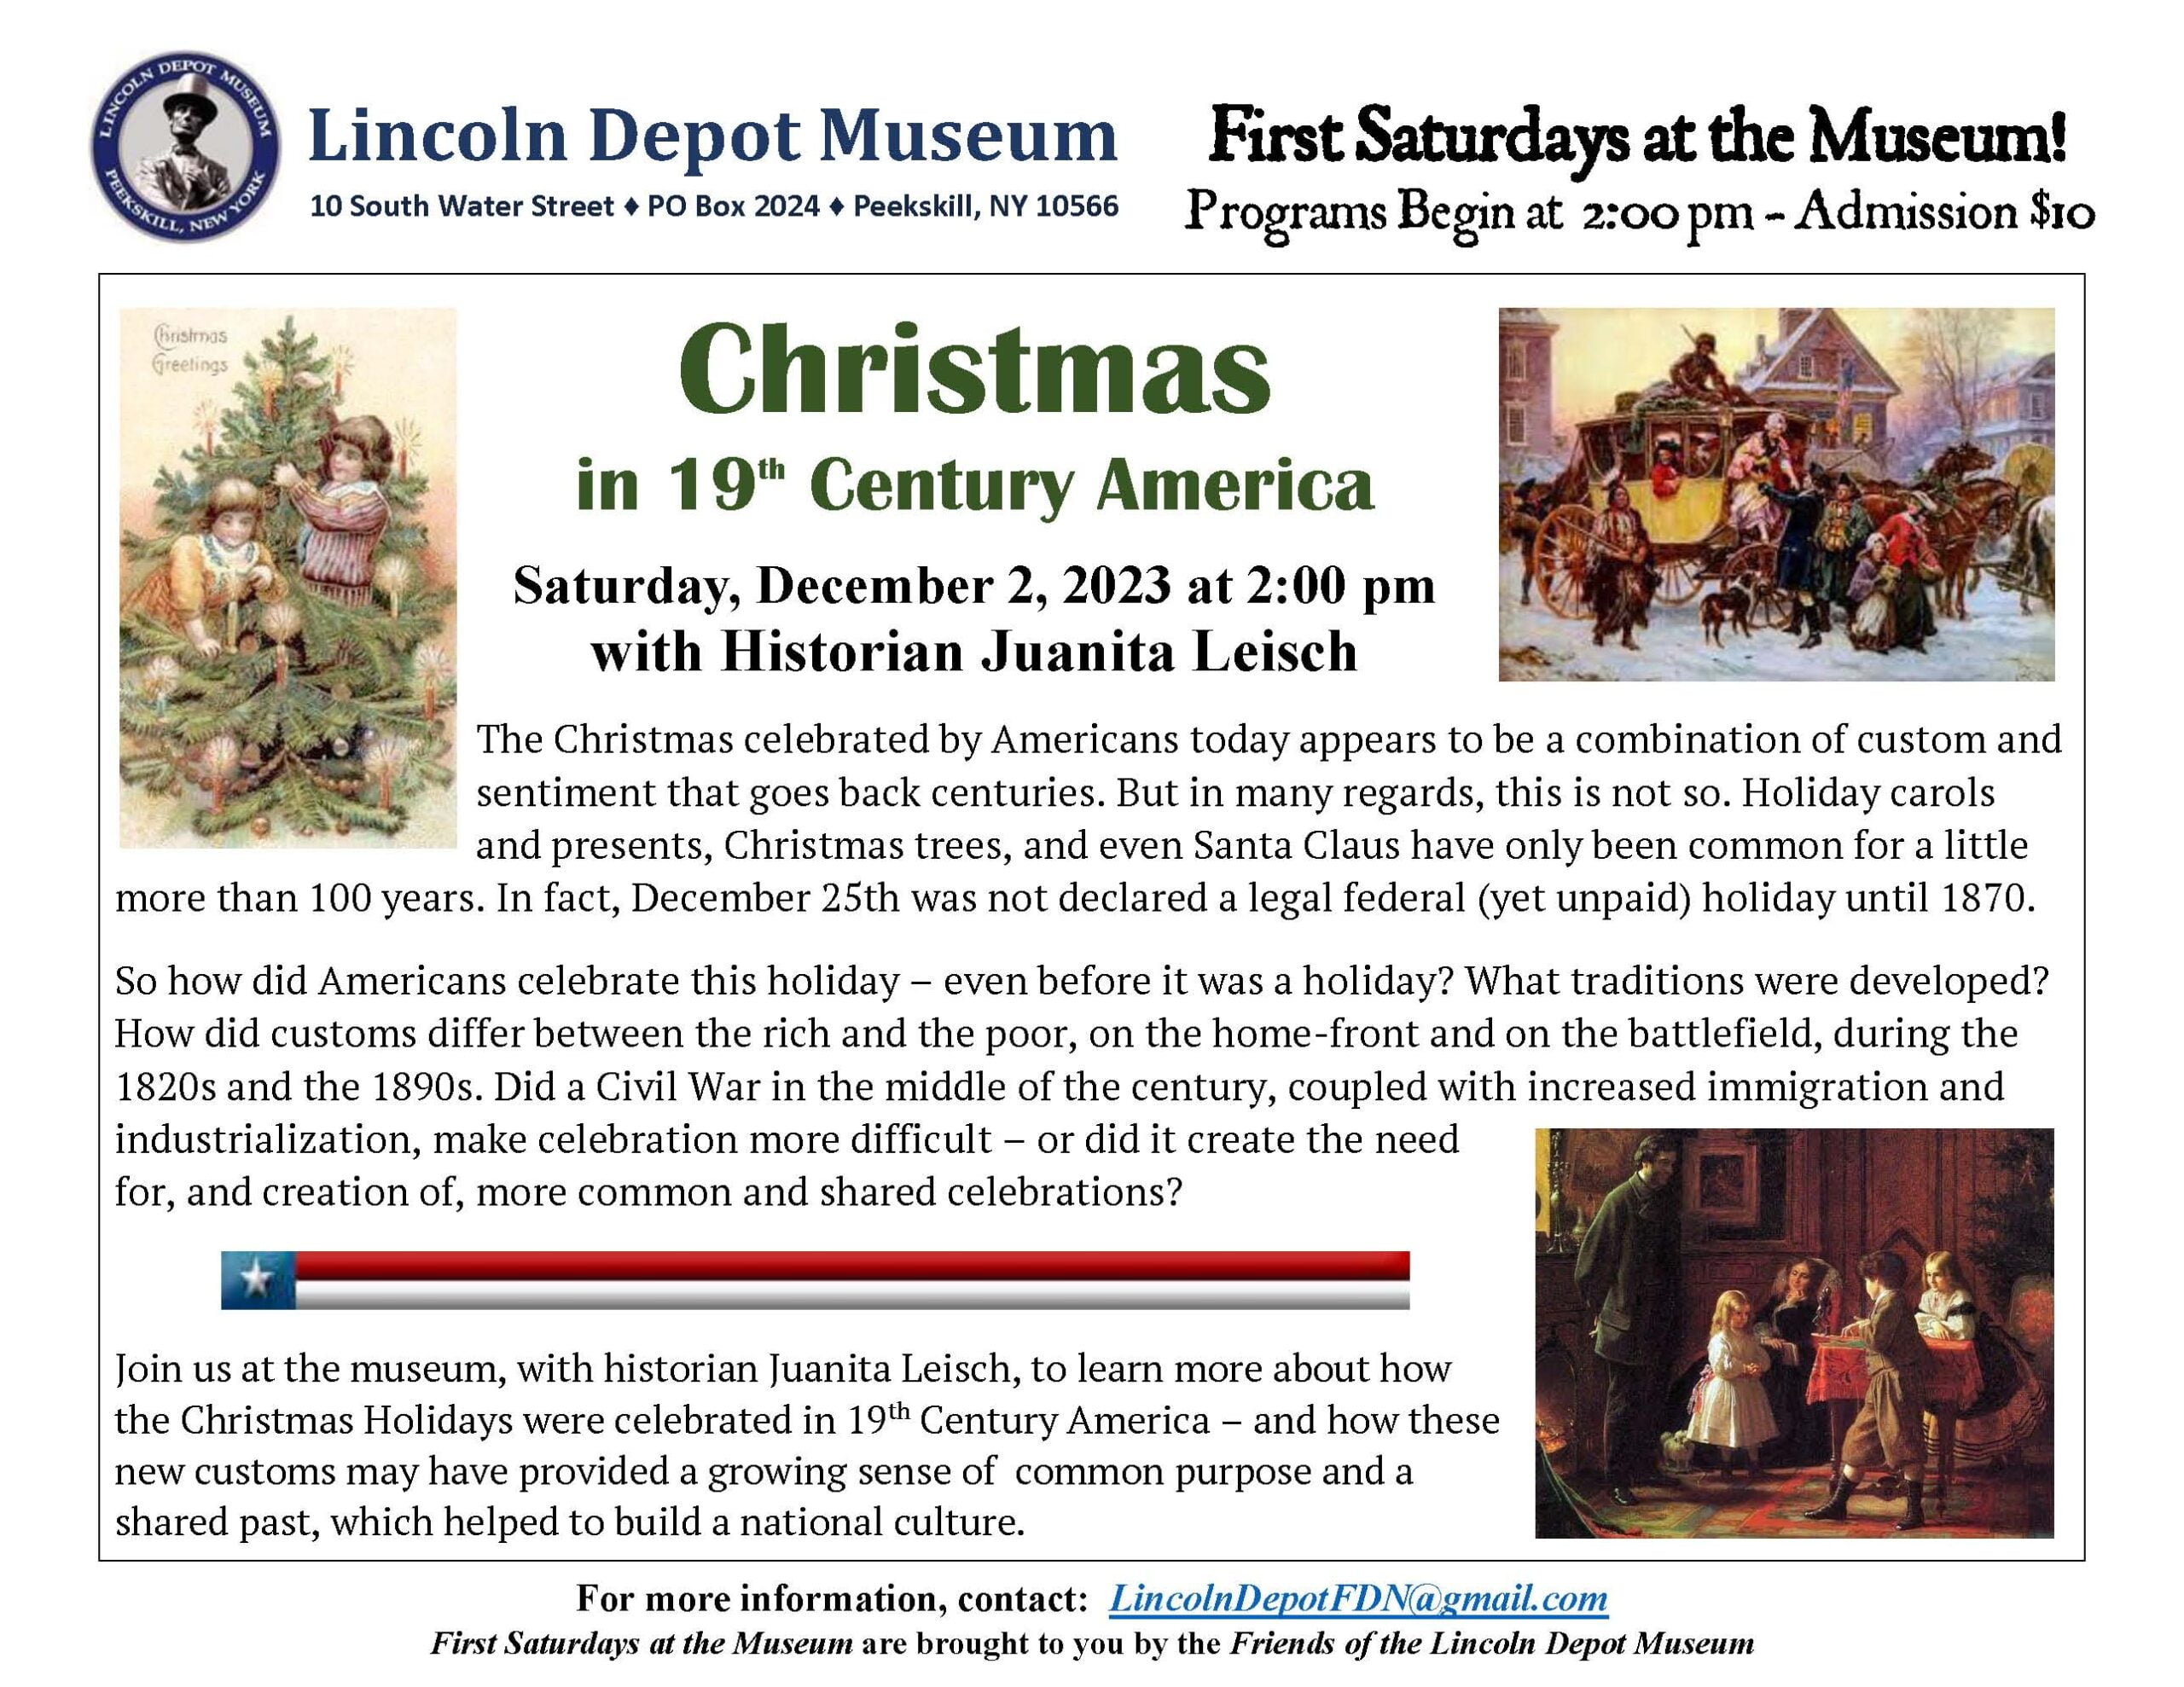 Flier for Christmas in the 19th Century at Lincoln Depot Museum